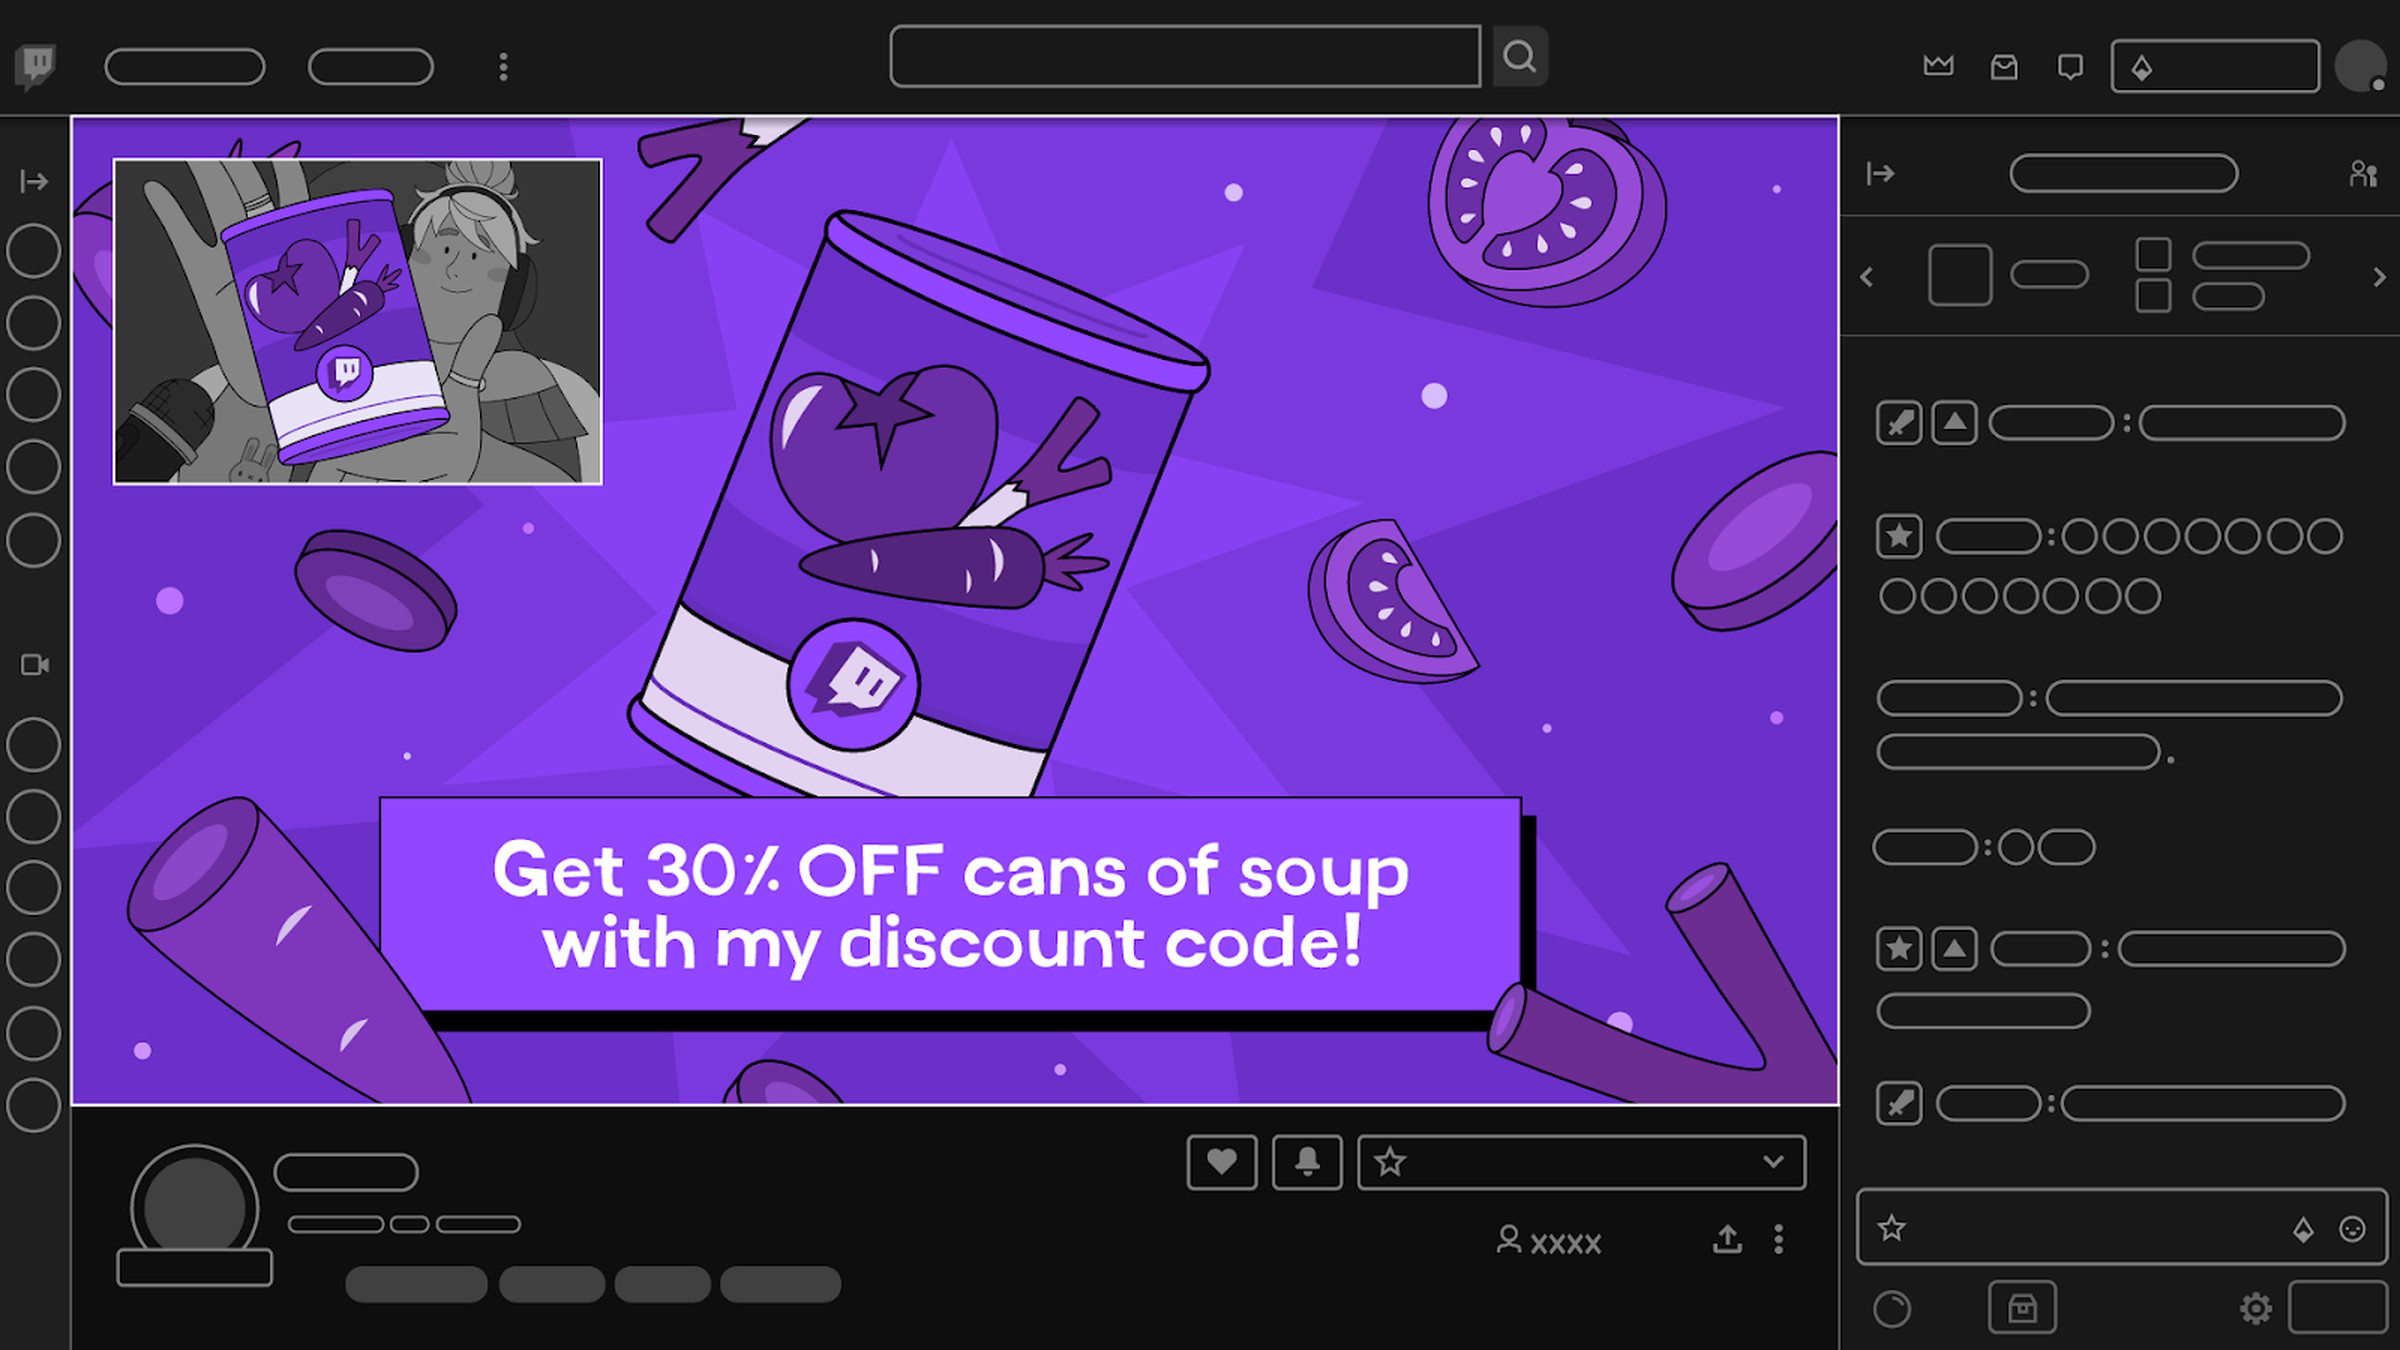 Image from Twitch illustrating an example of a static display ad featuring a purple image advertising a can of soup